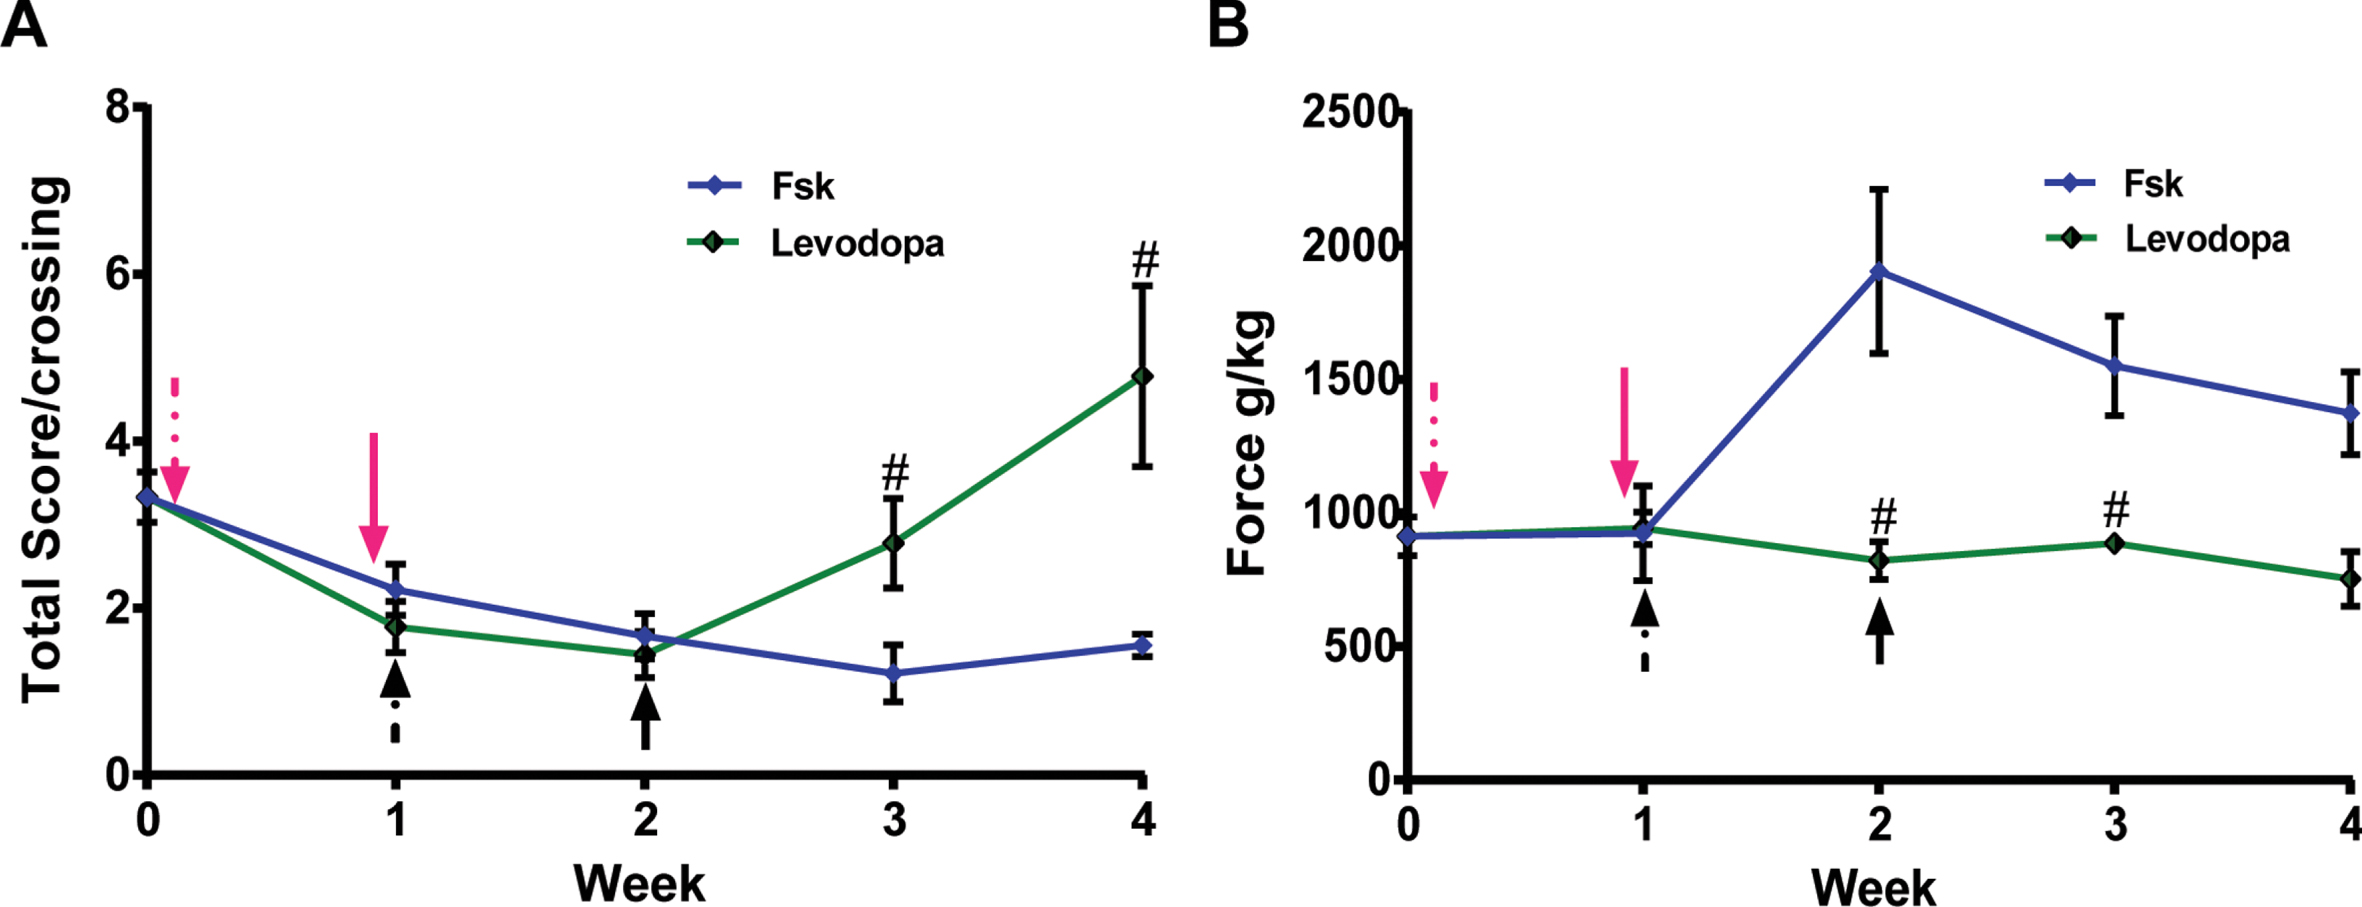 Intraperitoneal administration of Forskolin, but not Levodopa treatment, exhibits long-term anti-Parkinsonian effects in PINK1-KO rats. Representative longitudinal washout studies in 10-month-old WT and PINK1-KO rats that were I.P. treated with Levodopa (green trace) or with Forskolin (magenta trace) for ten days (dashed magenta arrow) prior to cessation of the treatment (solid red arrow) and assessed for motor coordination by using a beam balance (A) or assessed for grip strength by using a grip strength analyzer (B). In brief, while Levodopa can temporarily alleviate motor symptoms, only the anti-PD effects of Forskolin persisted more than two weeks following the cessation of treatment. Additionally, only I.P. administration of Forskolin but not Levodopa treatment was able to restore hindlimb muscle strength significantly in PINK1-KO rats, an anti-parkinsonian effect that persists following the cessation of treatment (solid arrow, magenta = Forskolin; Black = Levodopa).